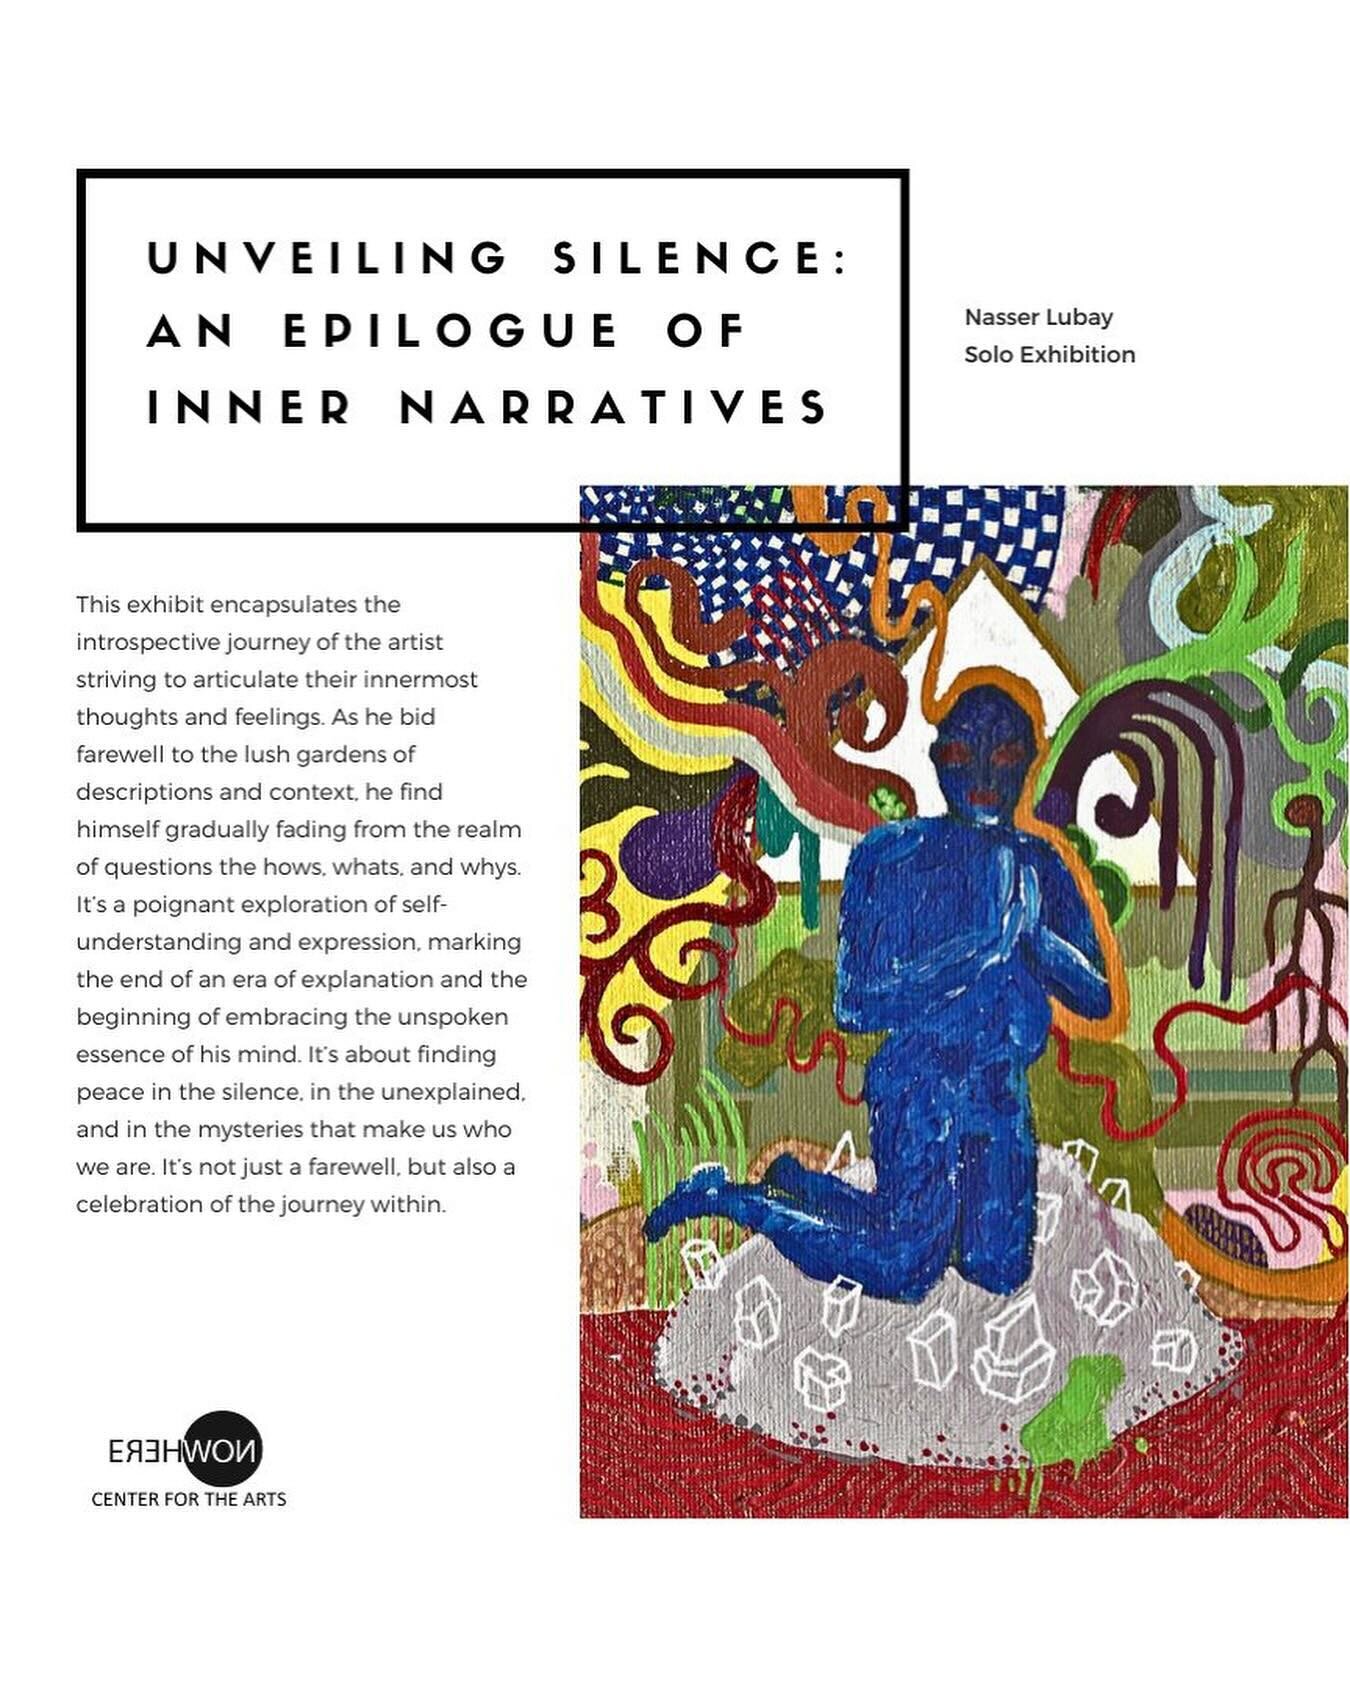 Unveiling Silence: An Epilogue of Inner Narratives 
Nasser Lubay, solo show
Erehwon Center for the Arts
Jan 26 - 28, Booth C22 
Department of Tourism- Health and Wellness Confex 2024
SMX Convention Center, Pasay 

This exhibit encapsulates the intros